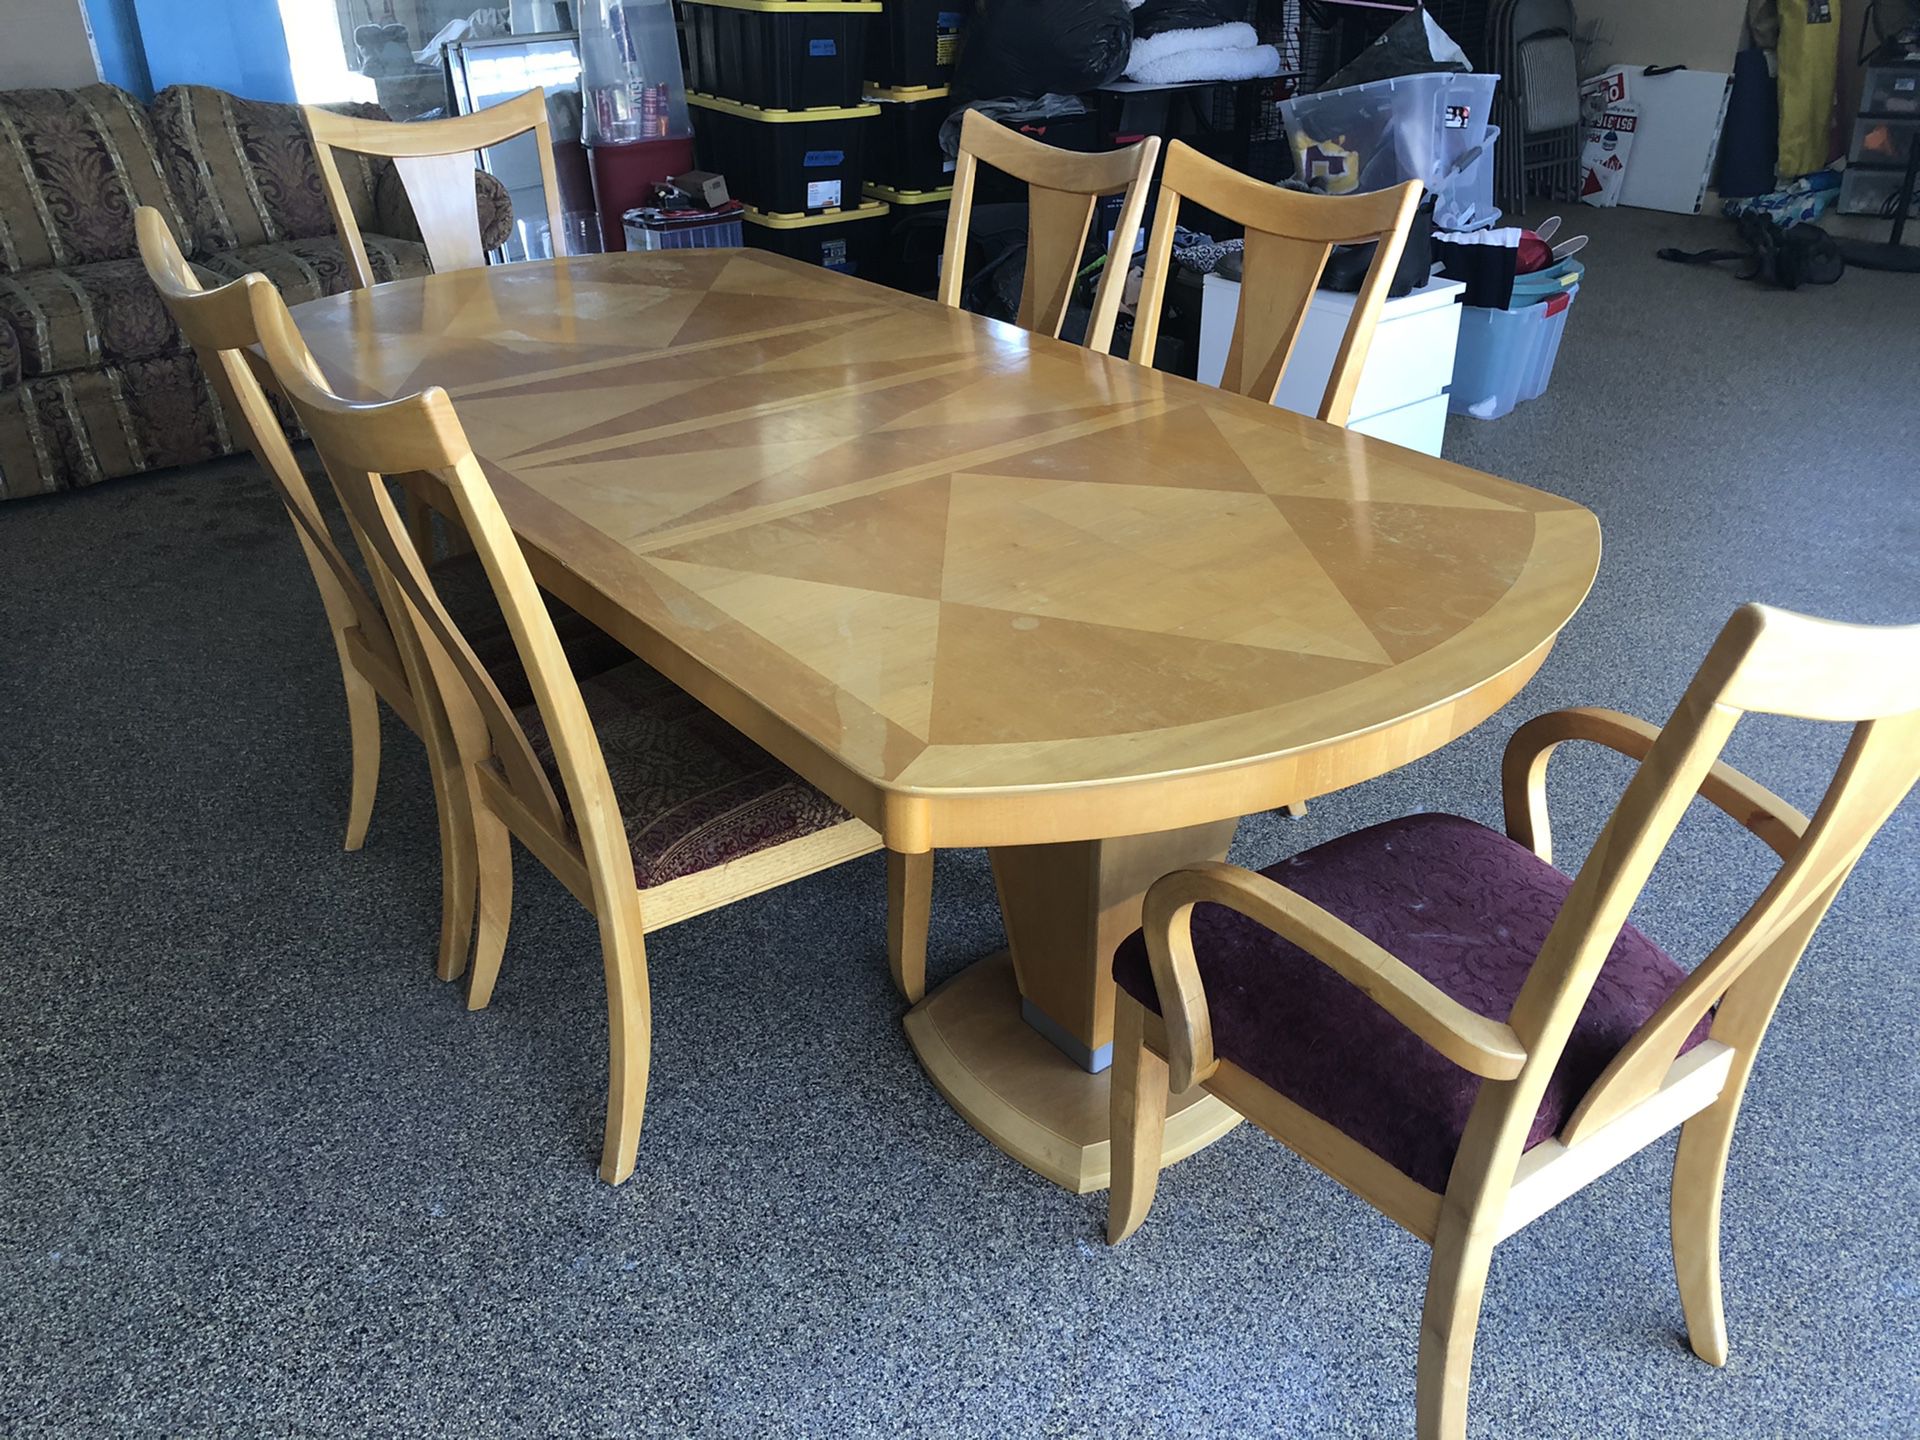 Dining Table and 6 Chairs. Good condition.